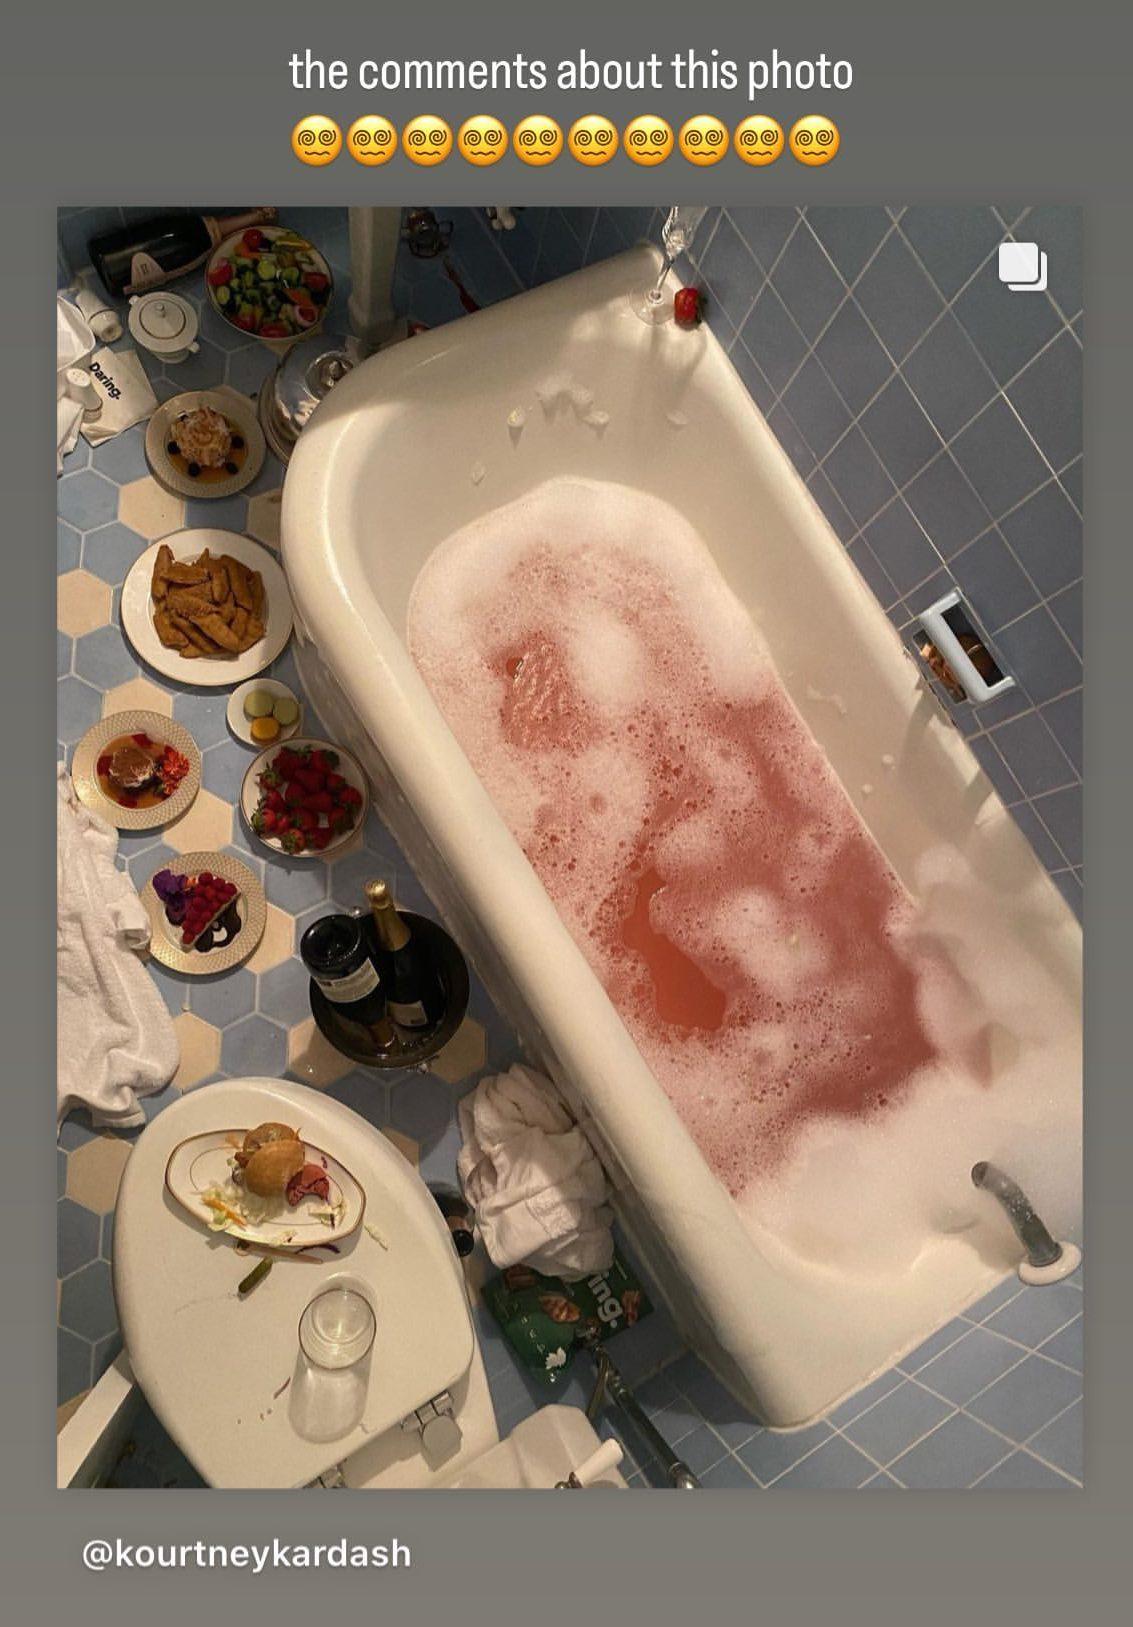 Kourtney Kardashian Gets Trolled By Fans For Posting 'Disgusting' Food Pictures Taken In Her Bathroom